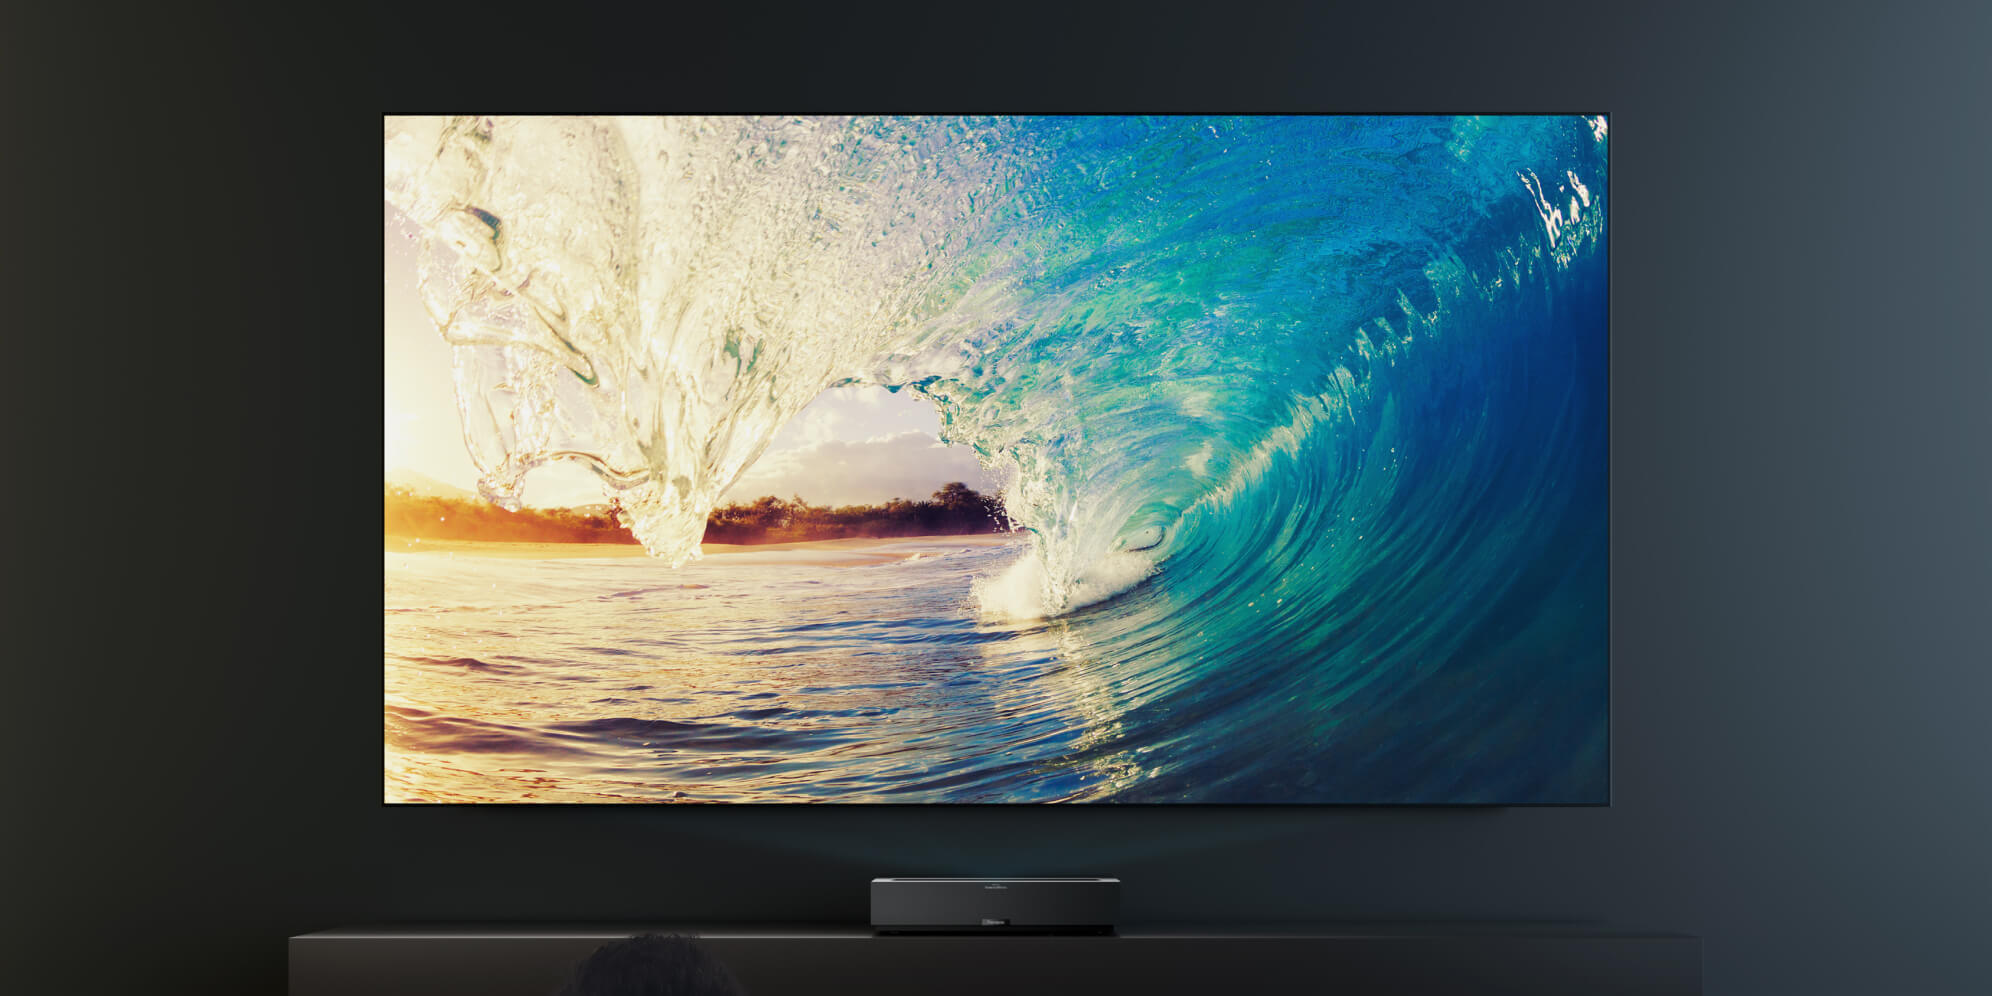 Formovie launched its first 150-inch Mijia Laser Projection TV on xiaomi website